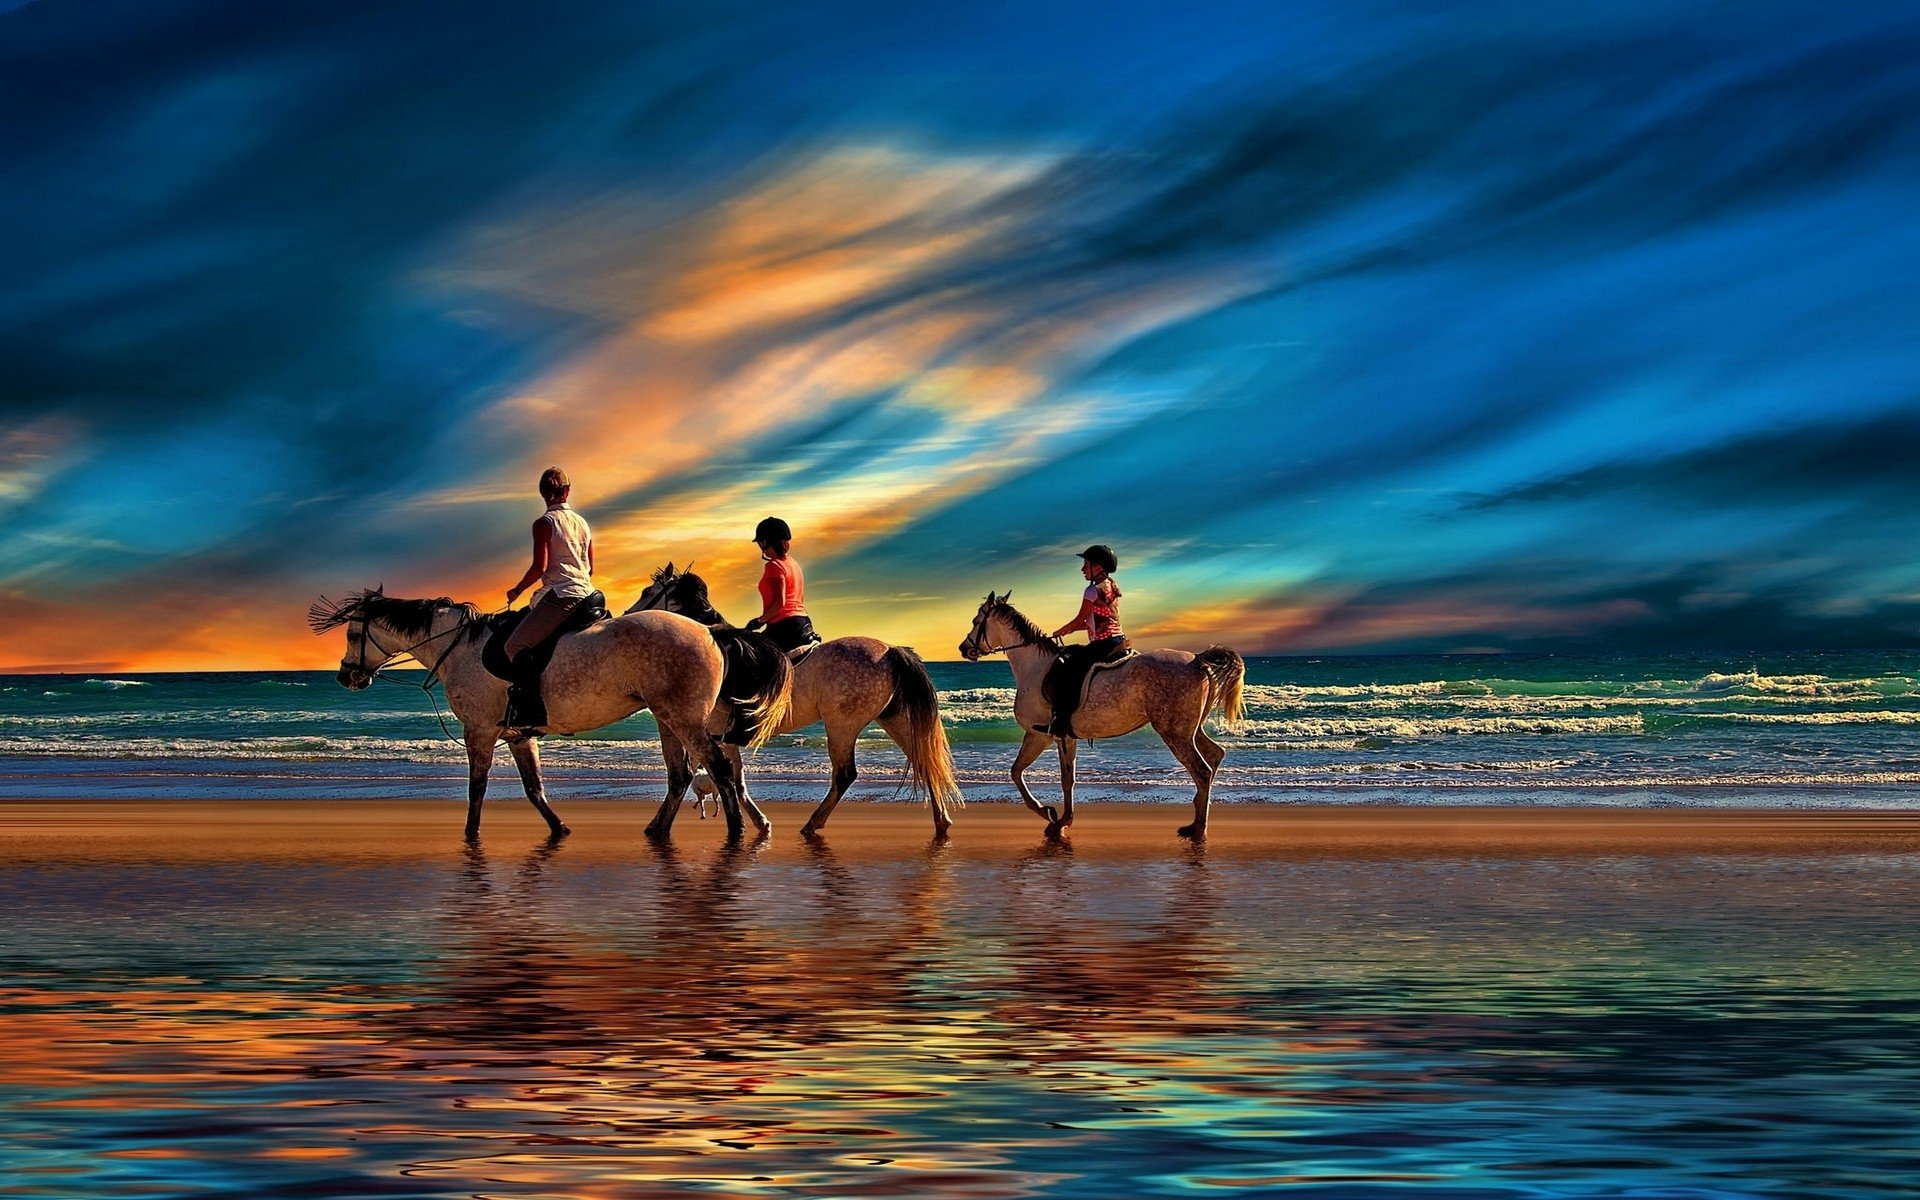 Equitation: Pleasure riding at the beach, Recreational activity for a family. 1920x1200 HD Background.